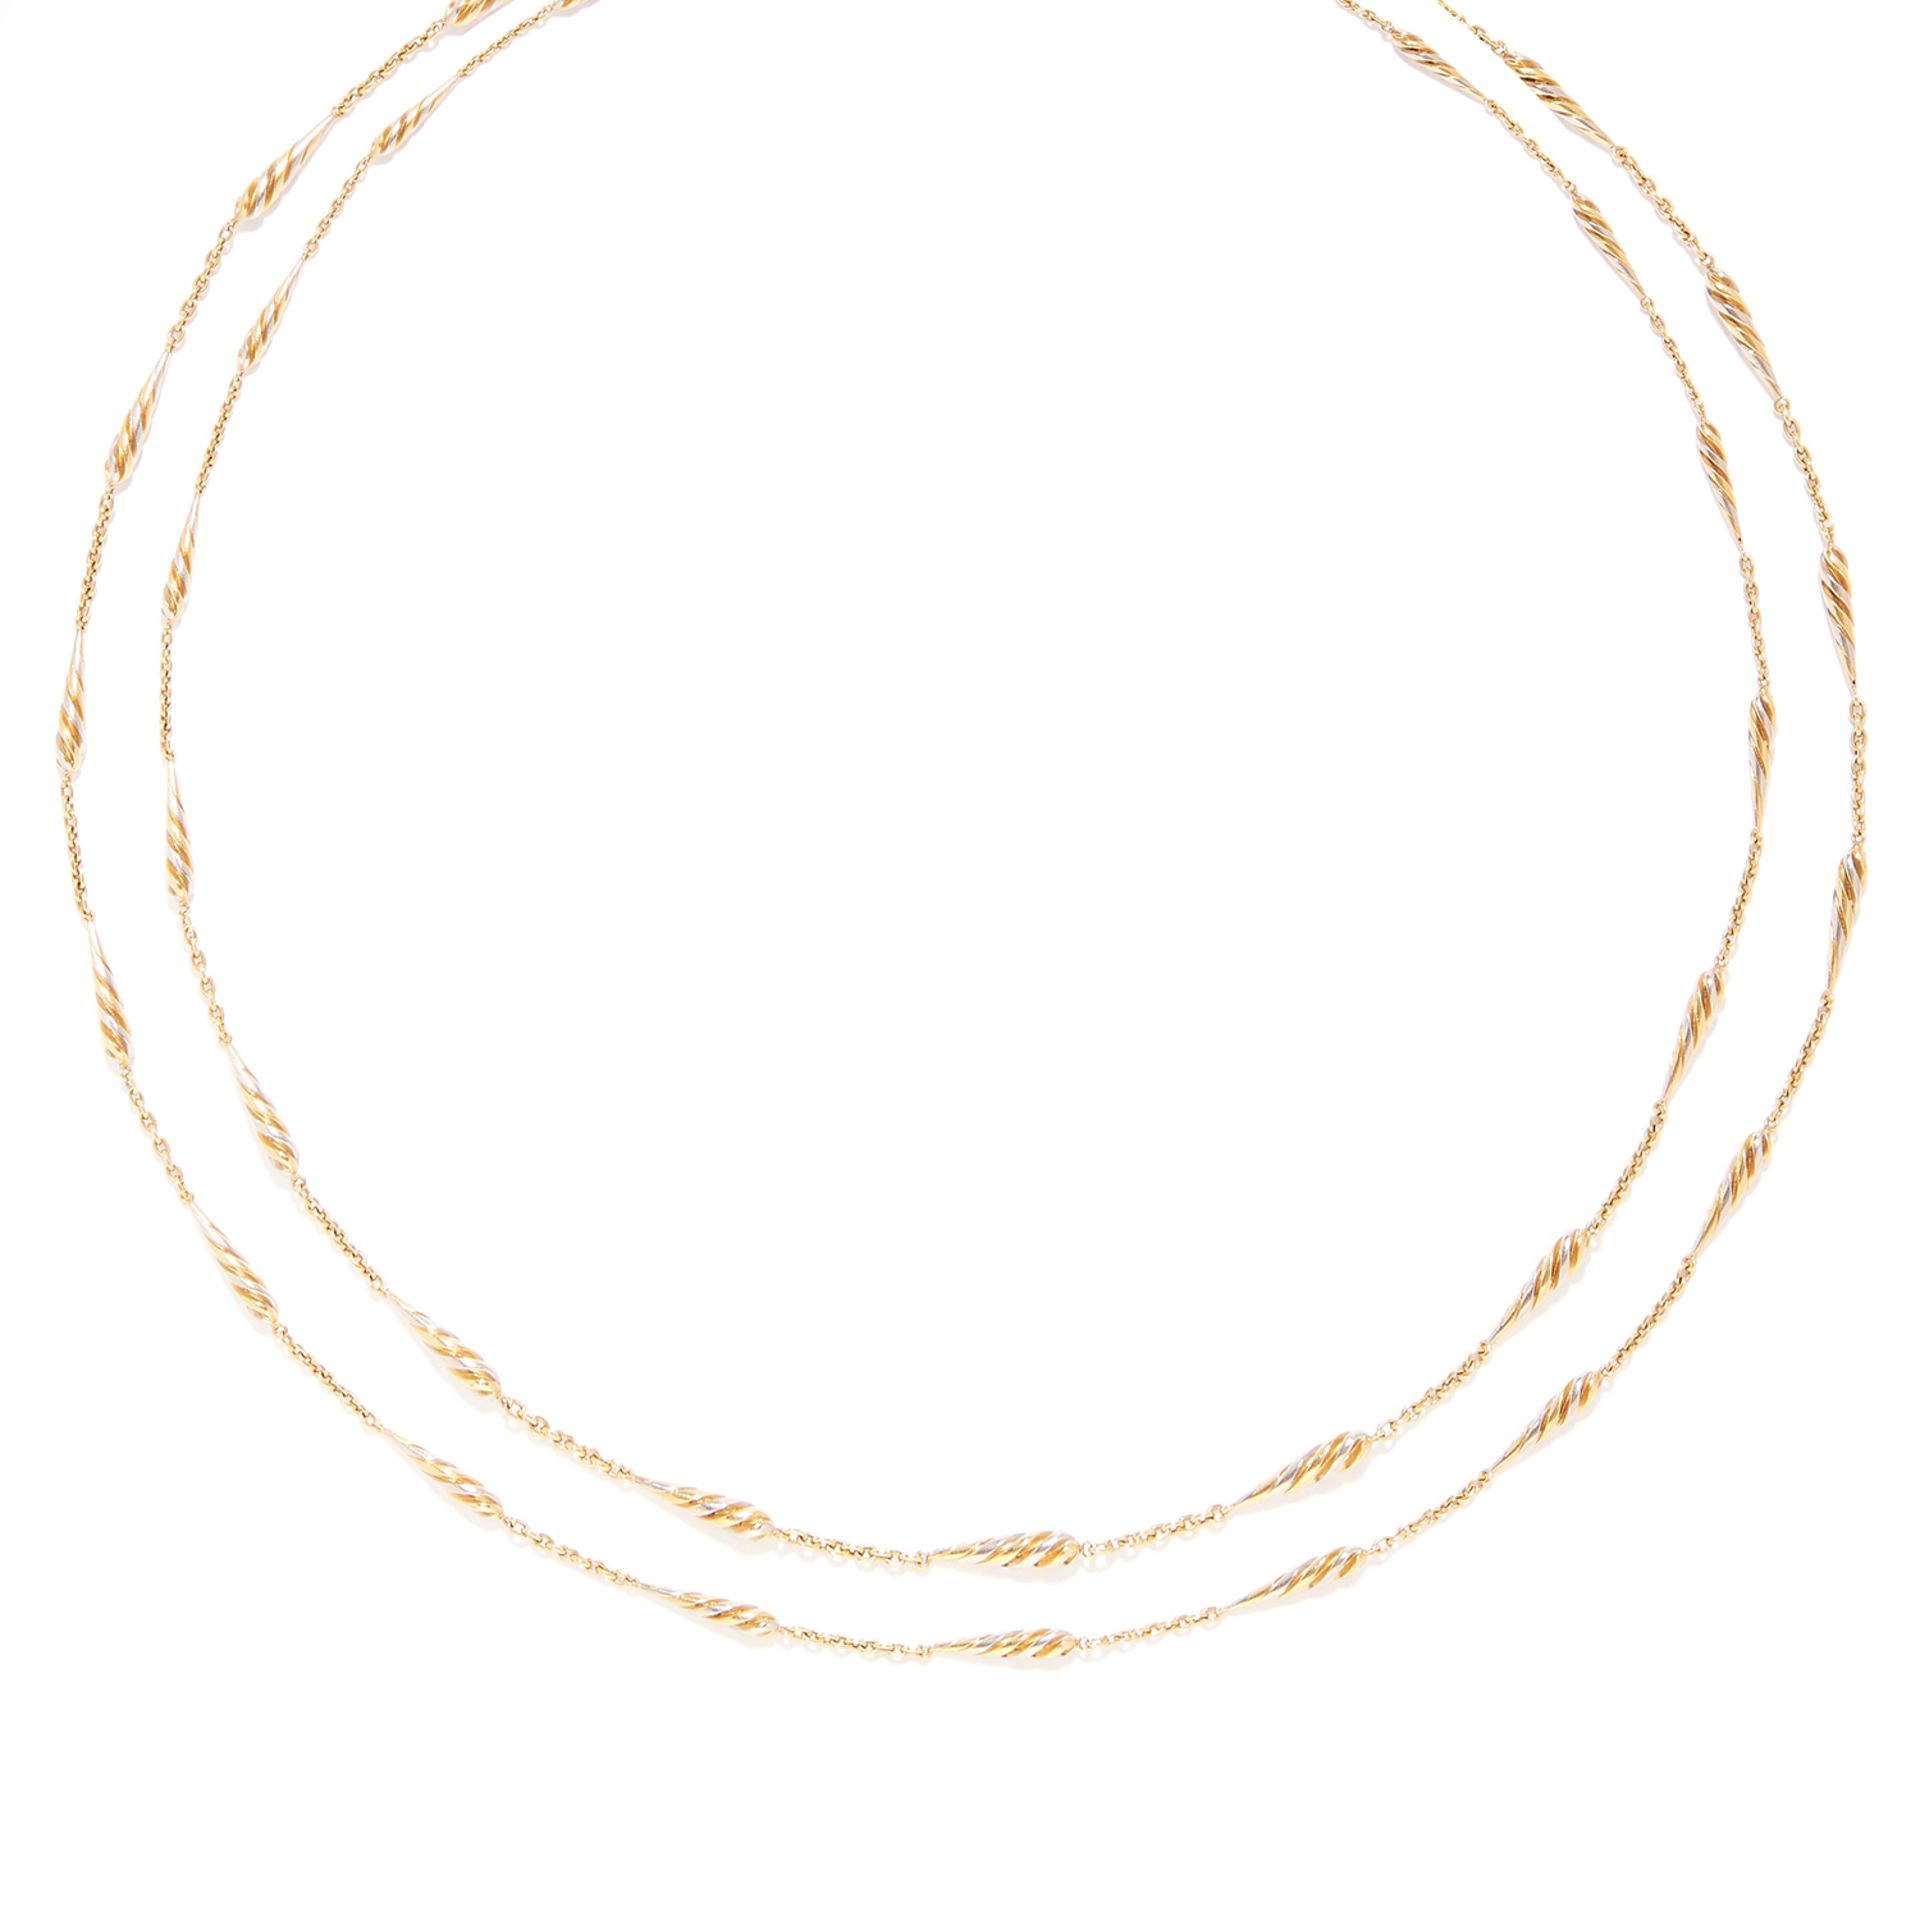 FANCY LINK LONGCHAIN SAUTOIR NECKLACE in platinum and 18ct yellow gold, 155.0cm, 51.5g.